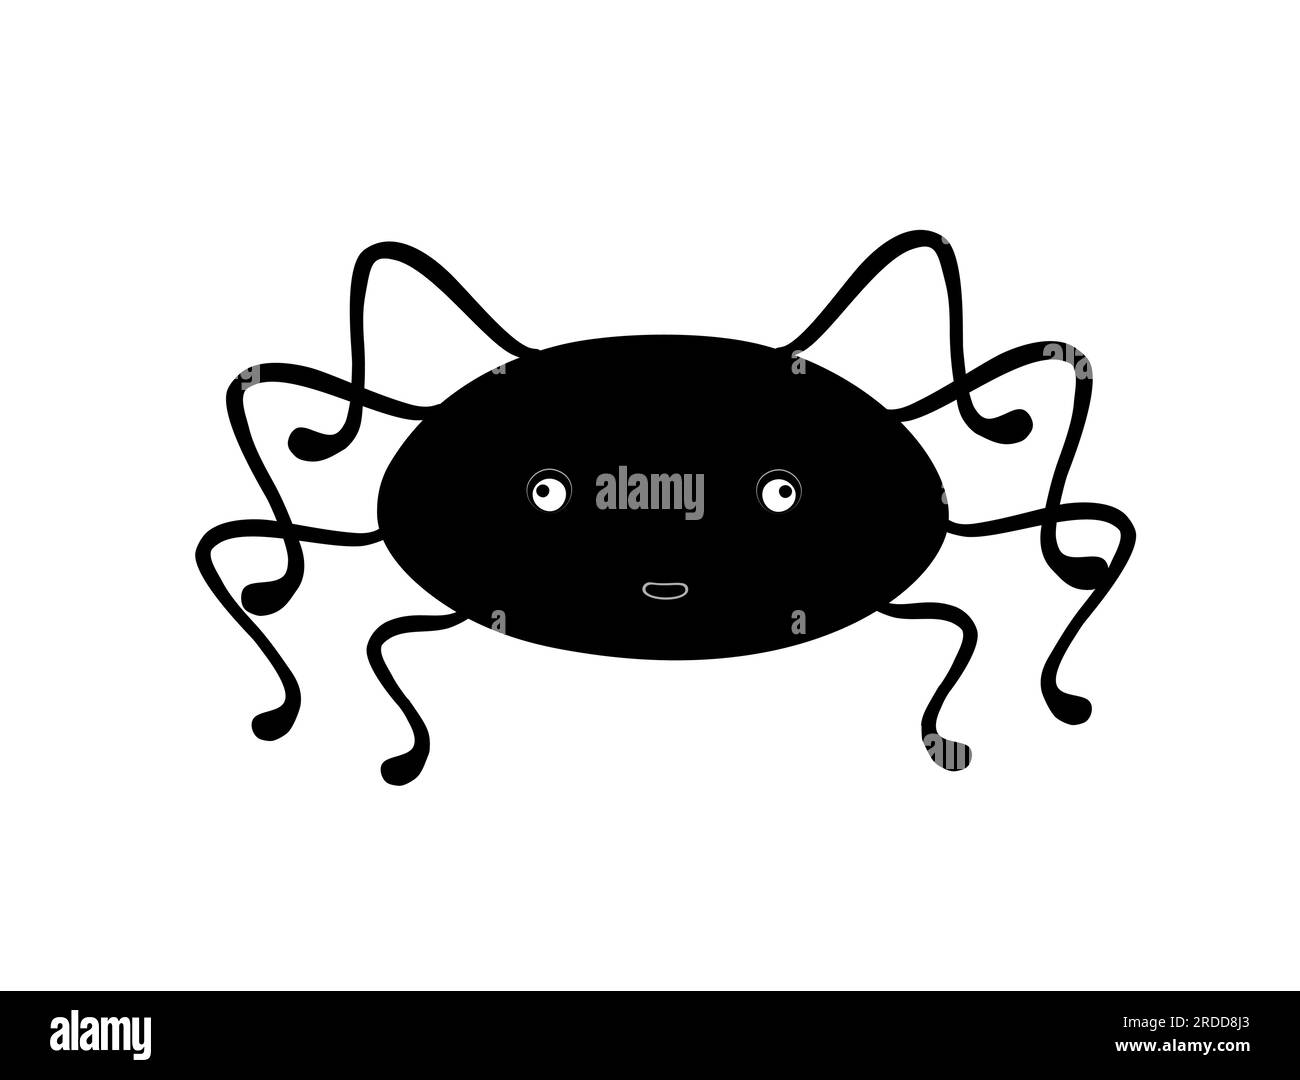 Little cartoon spider with emotions vector illustration, cute spooky simple character black and white drawing for Halloween holiday celebrations, kids design, nursery decor, cards, poster Stock Vector